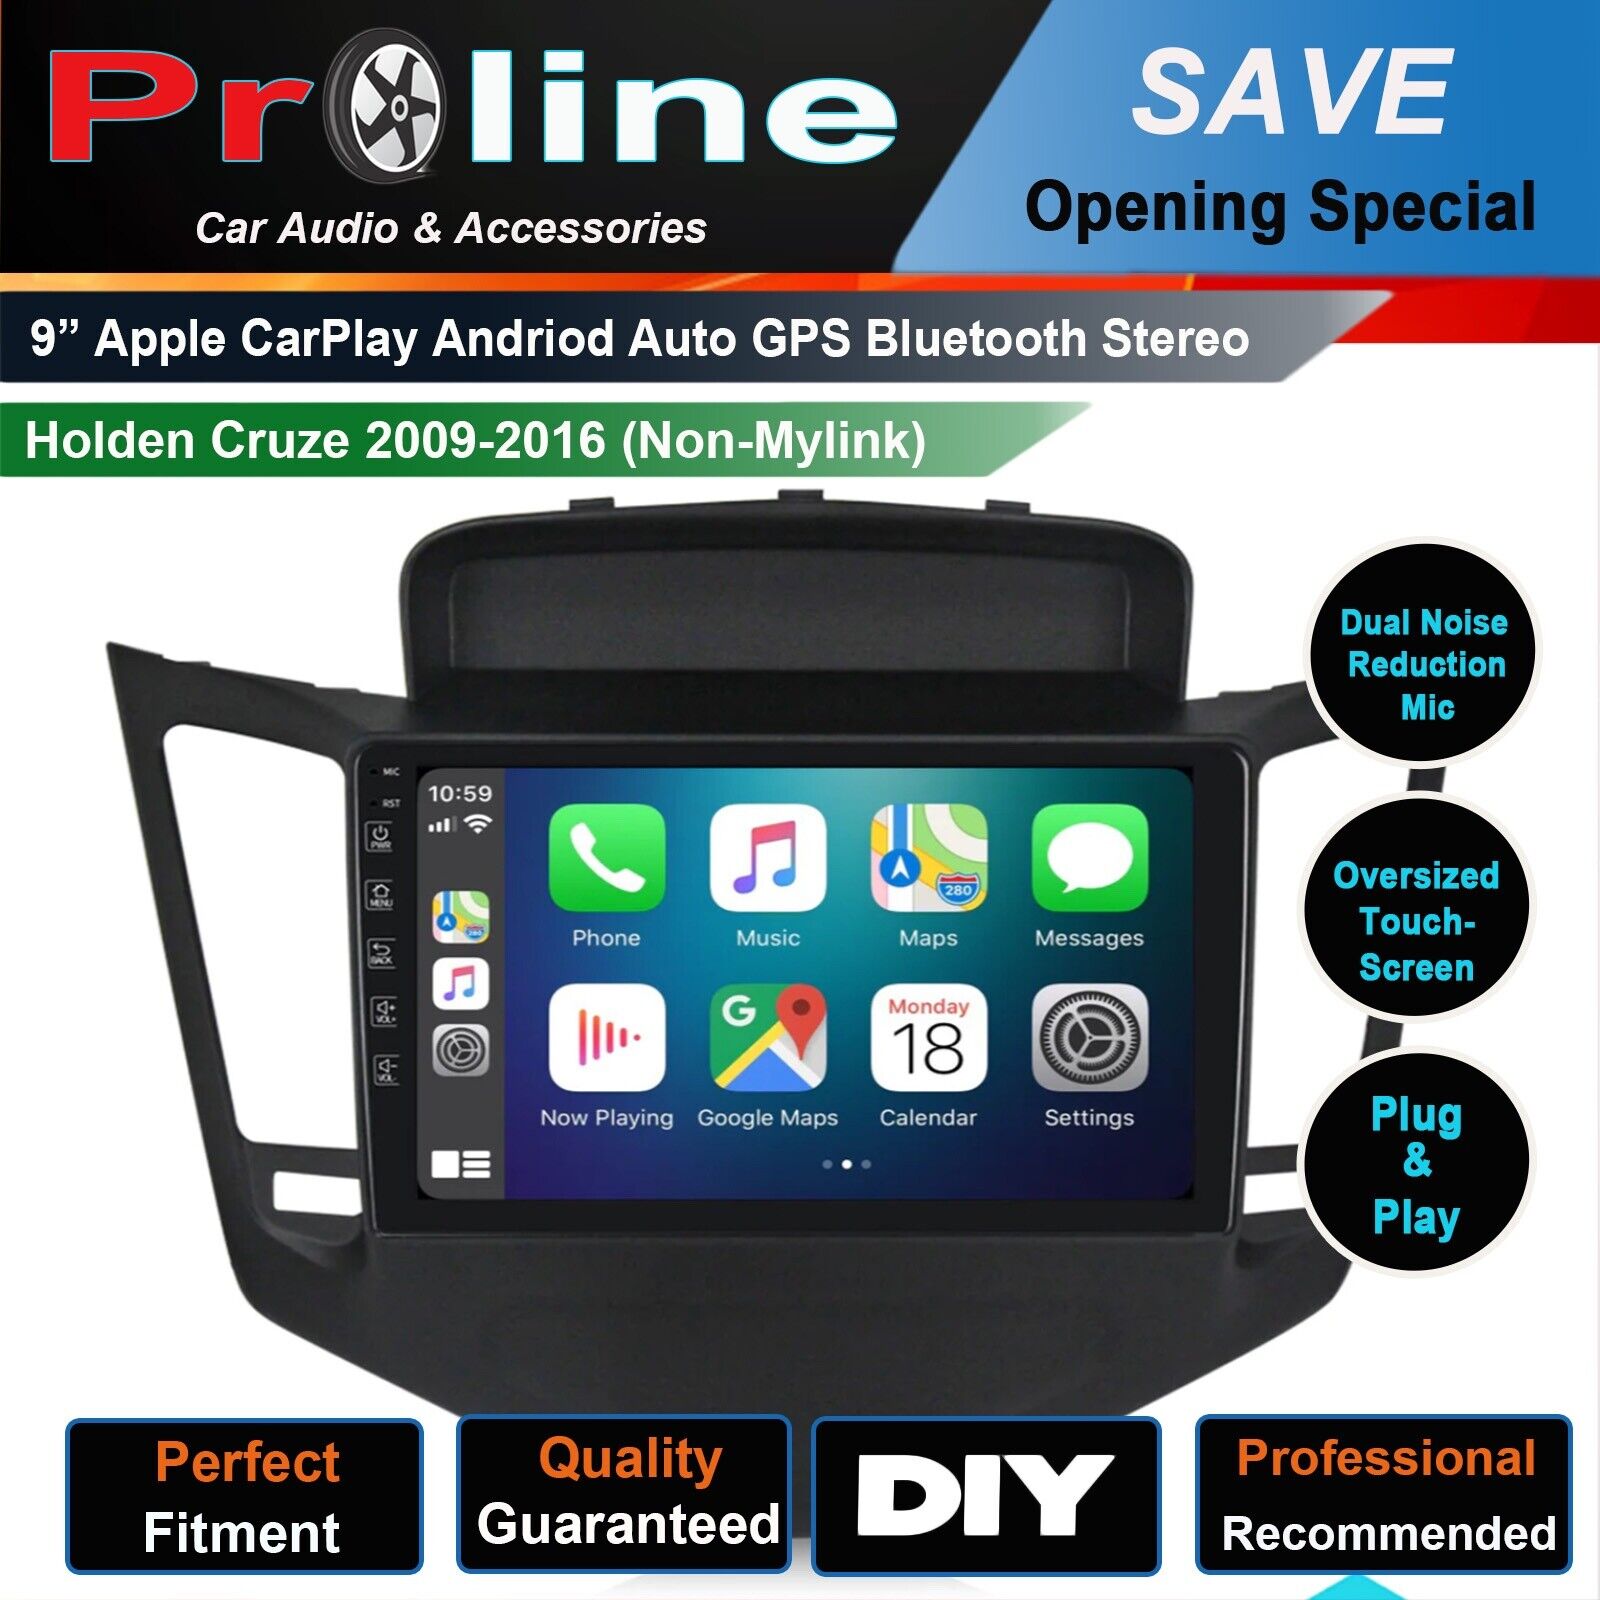 9" Holden Cruze 09-16 GPS Bluetooth Wireless Apple CarPlay Android Auto Stereo, for 9" Holden Cruze 09-16 , head unit upgrade for 9" Holden Cruze 09-16  9" Holden Cruze 09-16 head unit replacement for 9" Holden Cruze 09-16 , head unit upgrade, for 9" Holden Cruze 09-16 stereo upgrade suit both manual and digital air condition control, provides installation. Upgrade to the Lastest Wireless Apple CarPlay Android Auto